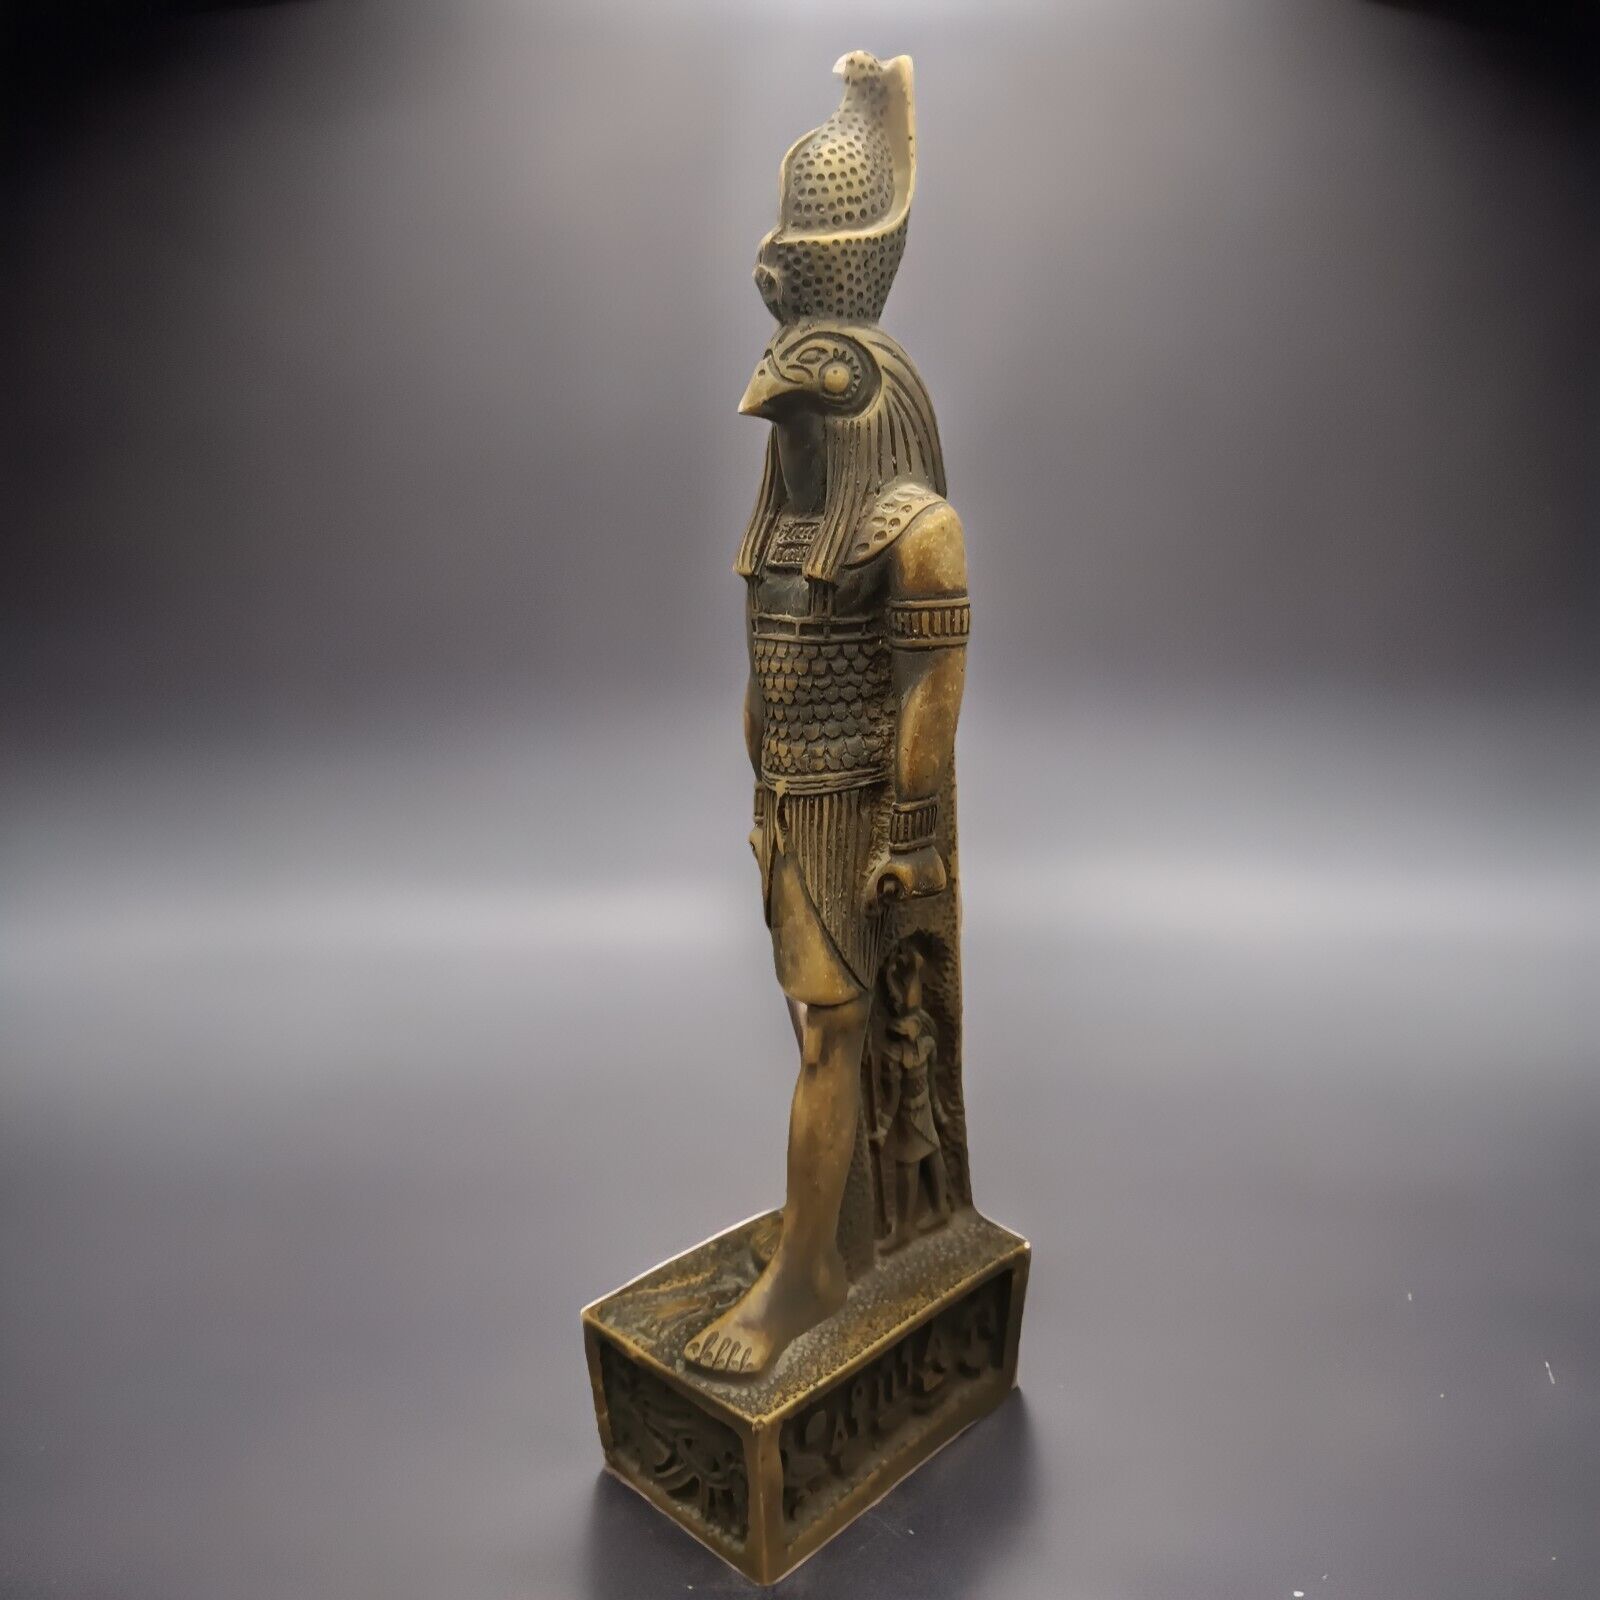 Rare Statue of Horus god of Sky from Ancient Egyptian Antiquities Era-BC